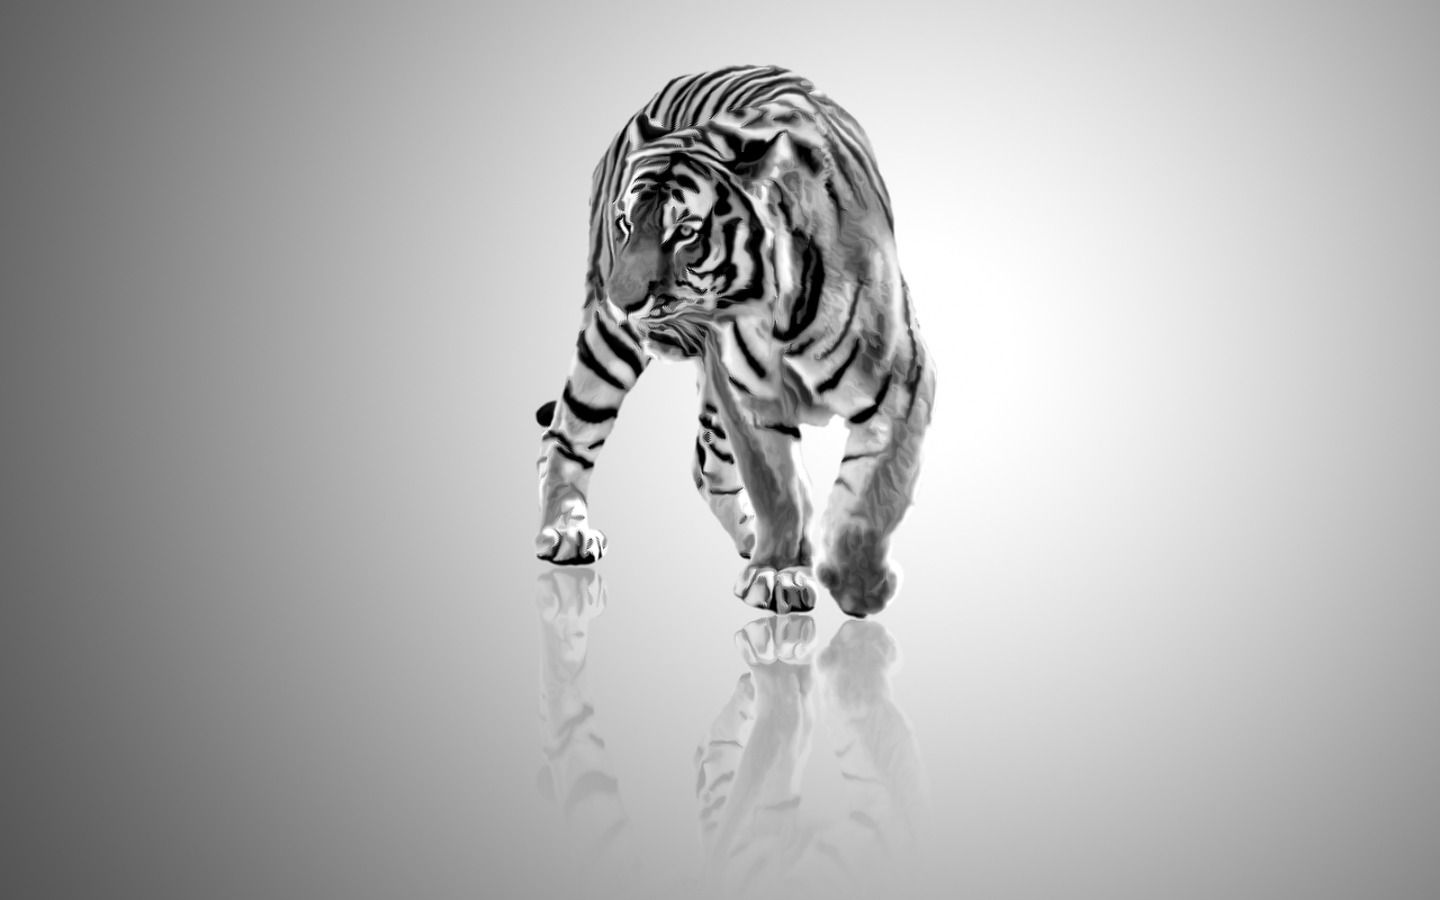 White, Full, Wallpaper, Hd - High Definition Black And White Tiger , HD Wallpaper & Backgrounds